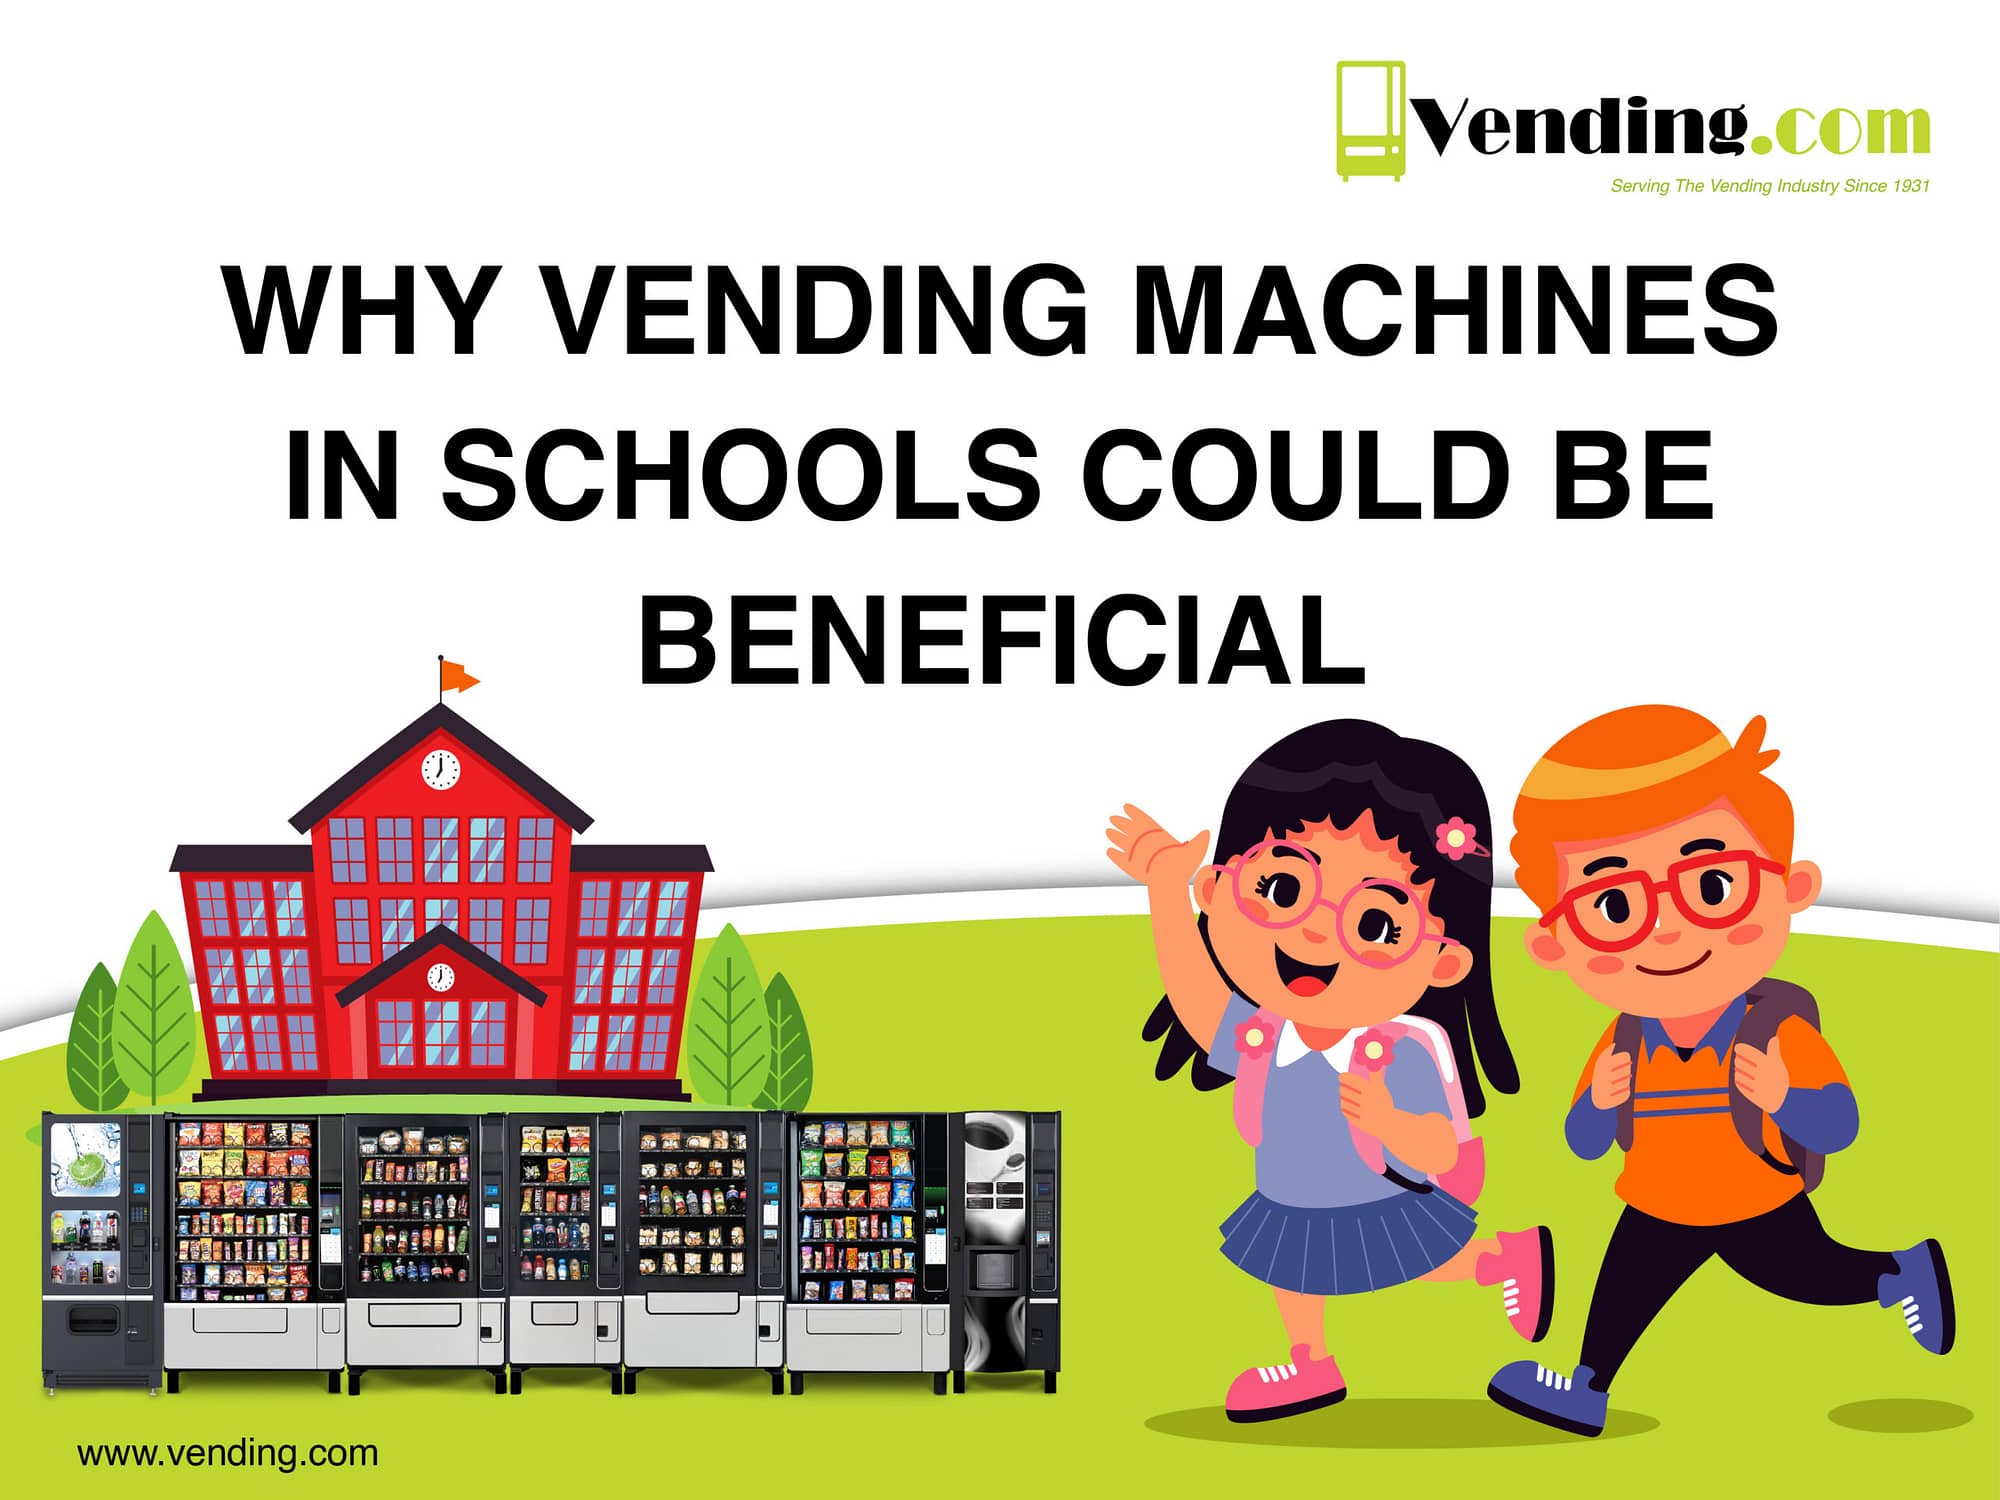 vending.com blog - Why Vending Machines Should Be Allowed in Schools